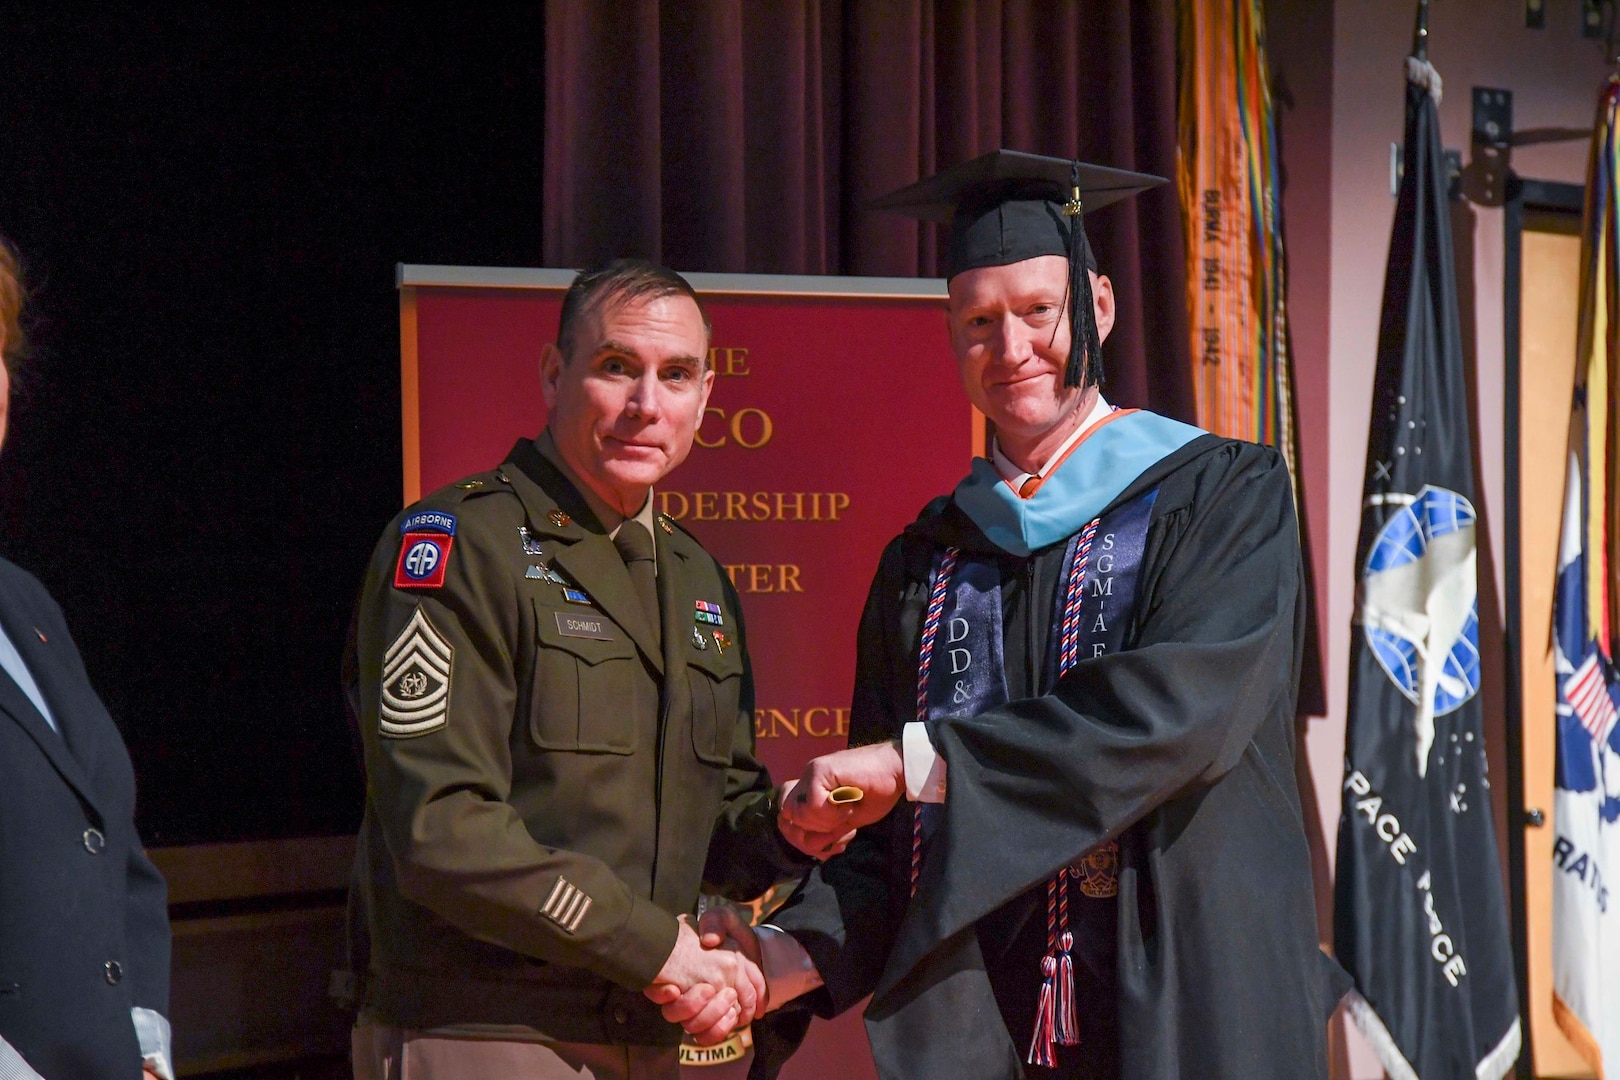 Sgt. Maj. Jon Whaley graduates with a Masters of Science degree in Instructional Design, Development and Evaluation from Syracuse University’s School of Education during a ceremony held Aug. 23, 2022, at Fort Bliss, Texas. Whaley is participating in the U.S. Army Sergeant Major Academy Fellowship Program.